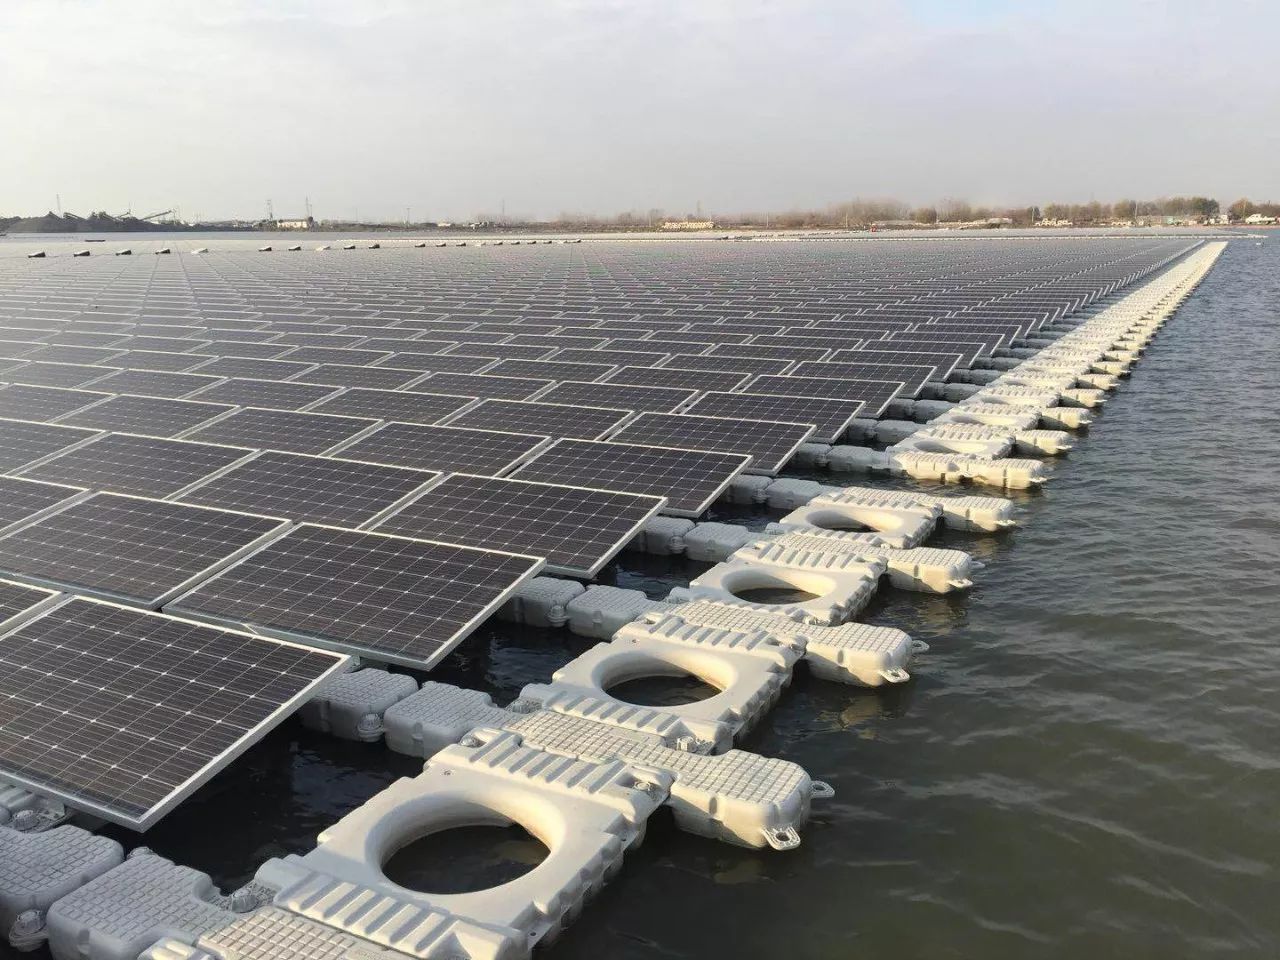 Construction scheme of floating photovoltaic project on water